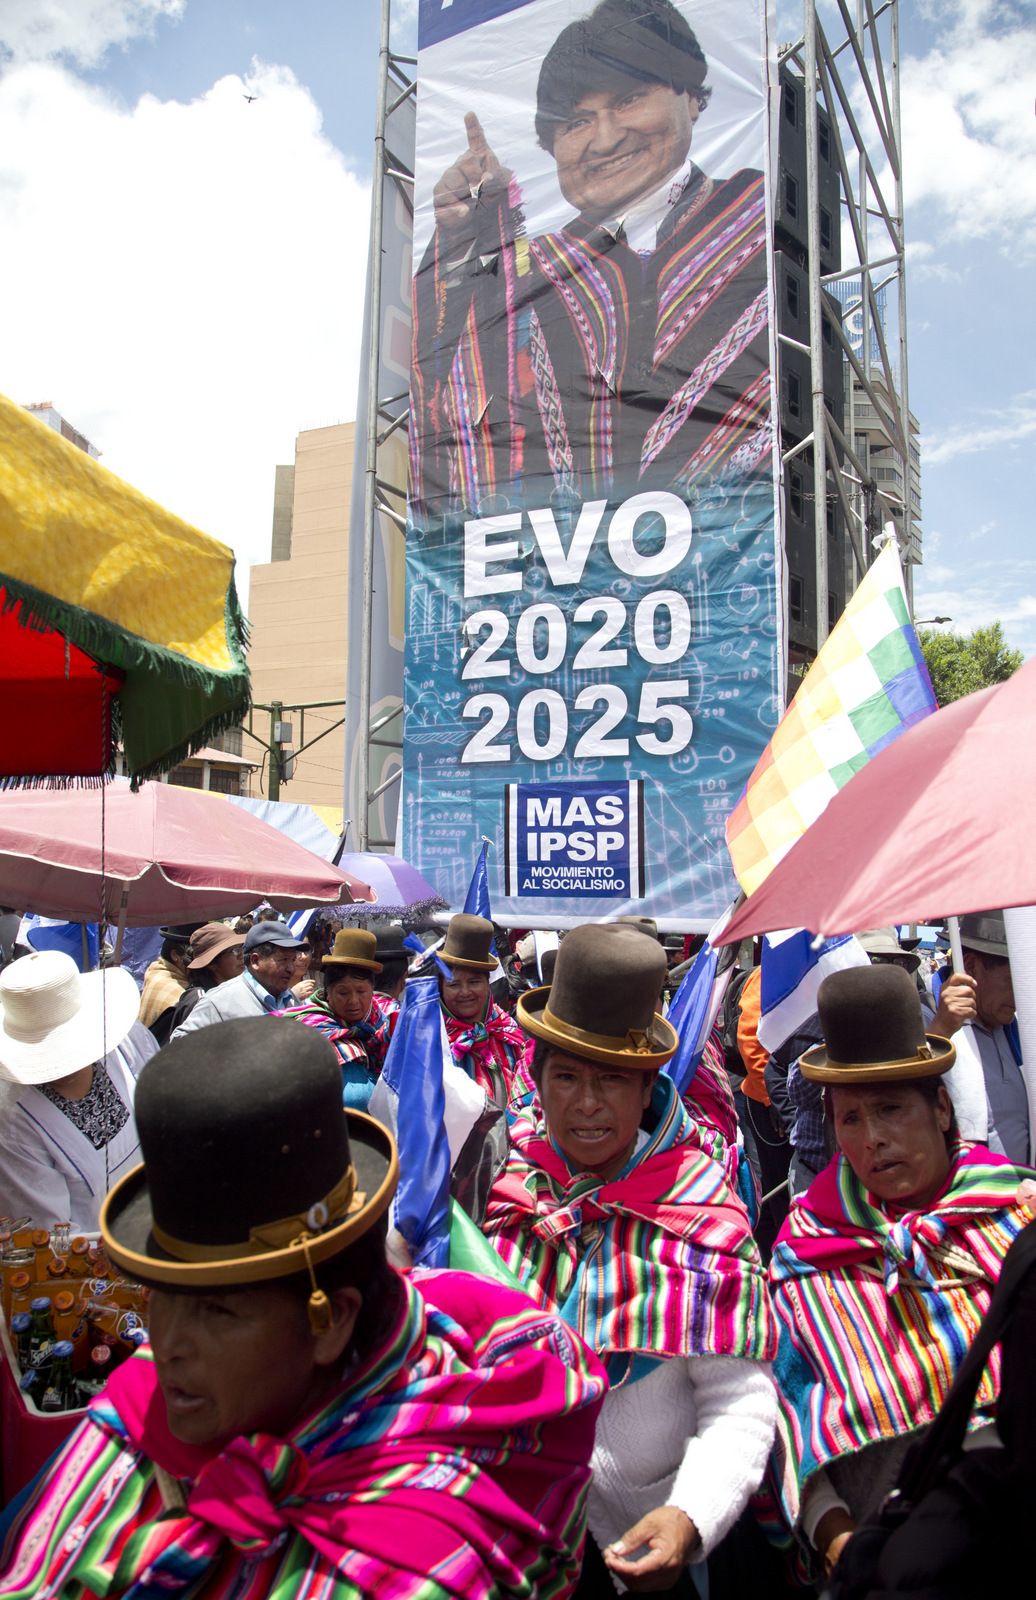 Supporters of Bolivia's President Evo Morales attend a rally in favor of his reelection, in La Paz, Bolivia, Feb. 21, 2018. Supporters of Morales marched in the 2 year anniversary of the referendum that rejected his bid for another reelection. Bolivia's Constitutional Court is allowing him to go forward with his run to a fourth mandate. (AP/Juan Karita)